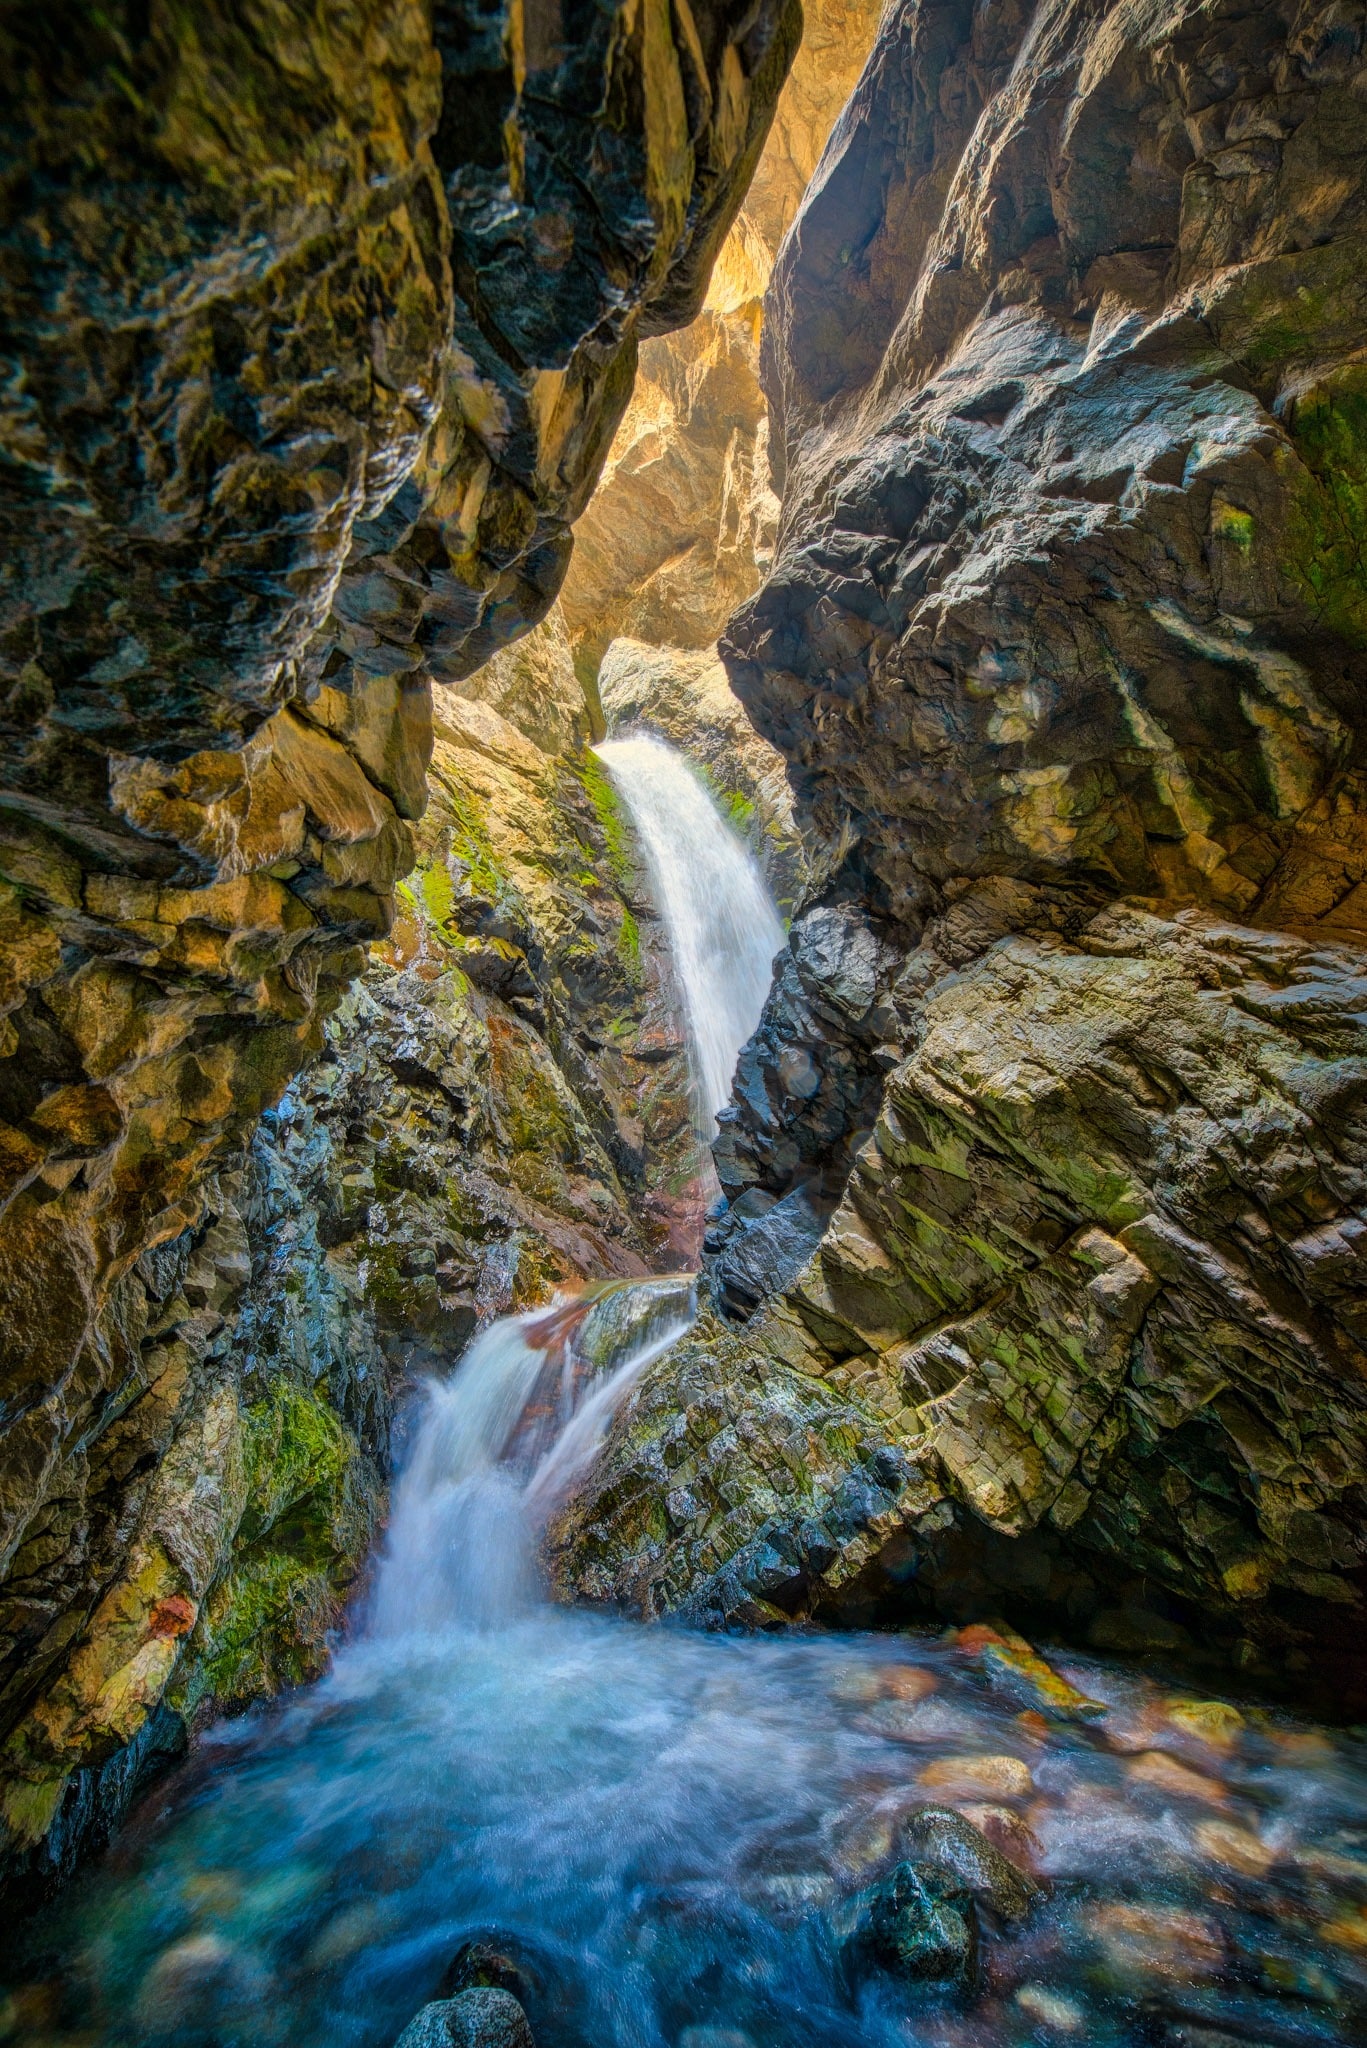 Zapata Falls cuts through a narrow gorge from high in the Sangre de Cristo mountains outside the Great Sand Dunes National Park and Preserve near Alamosa, Colorado.